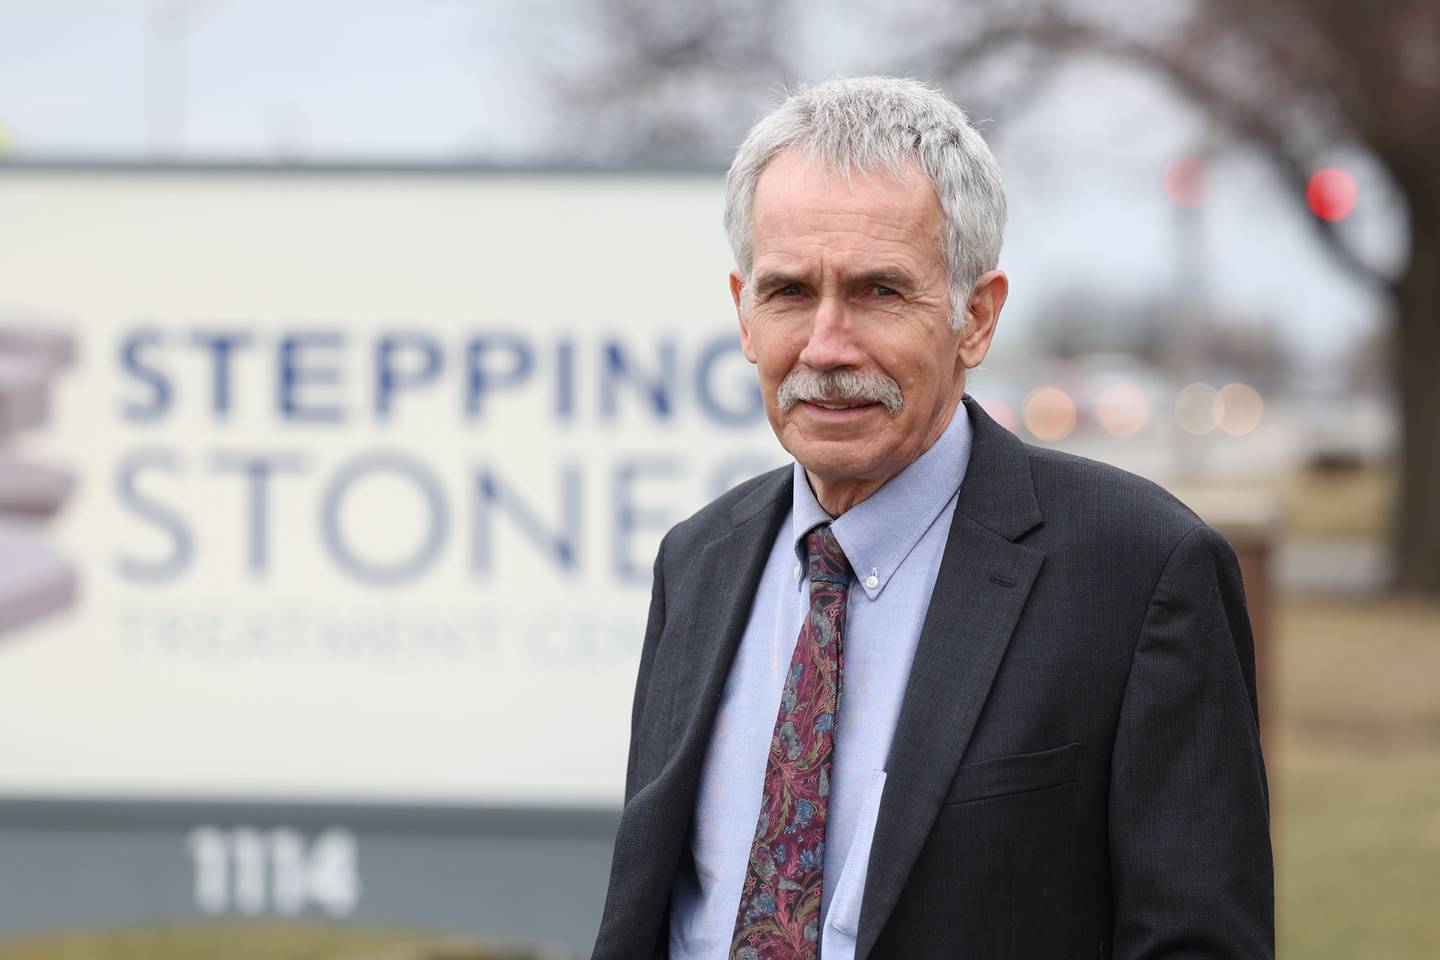 Paul Lauridsen, Executive Director of Stepping Stones poses for a photo on Wednesday, February 15th in Joliet.